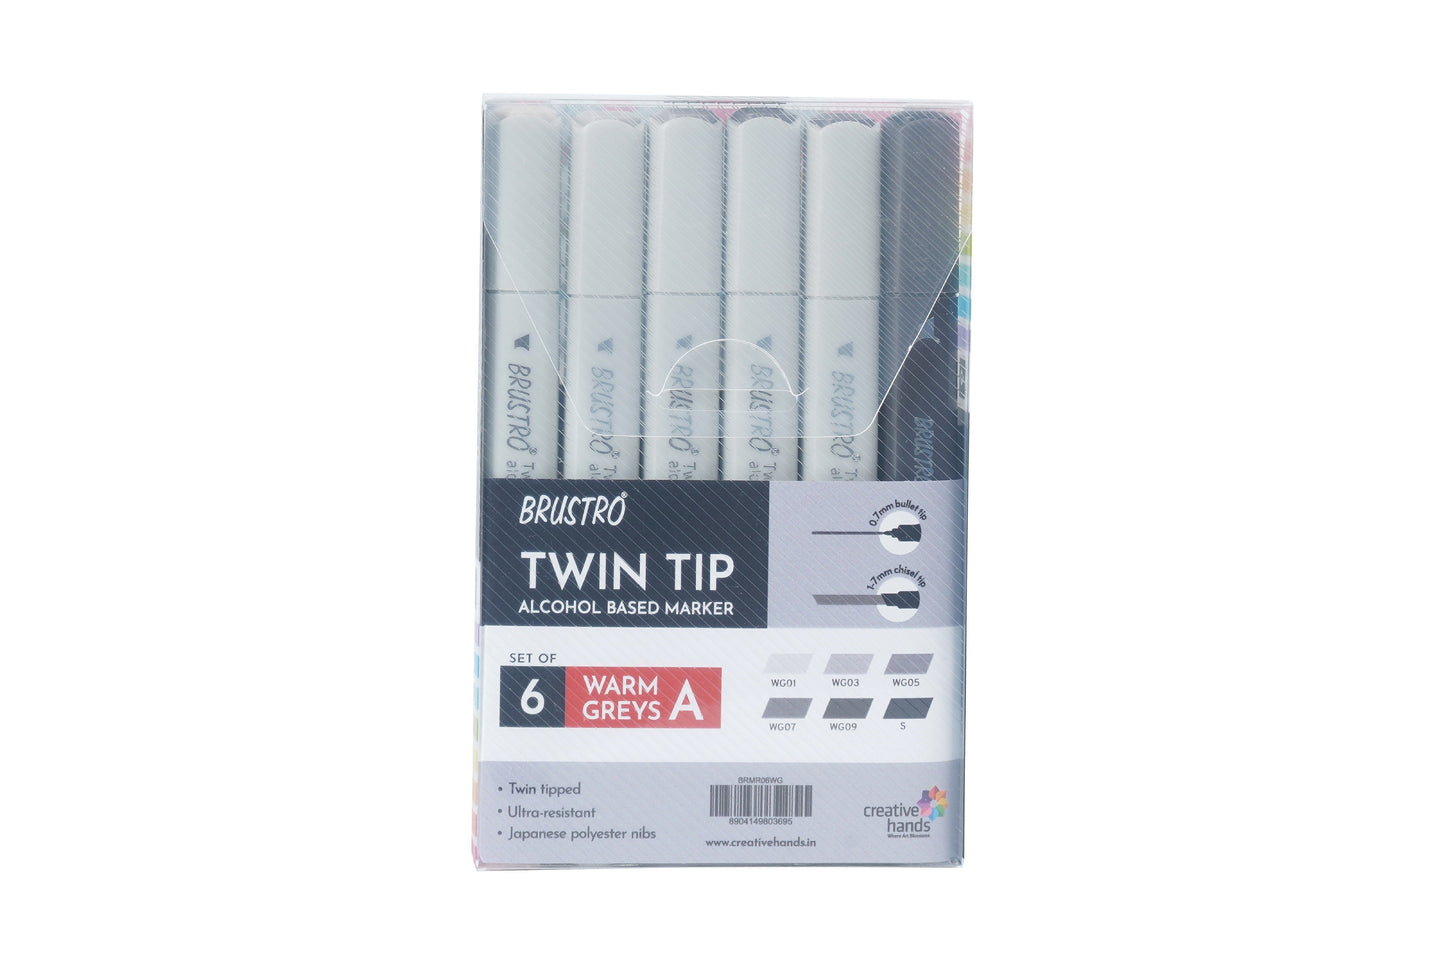 Brustro Twin Tip Alcohol Based Marker Sets 6 Warm Grey A